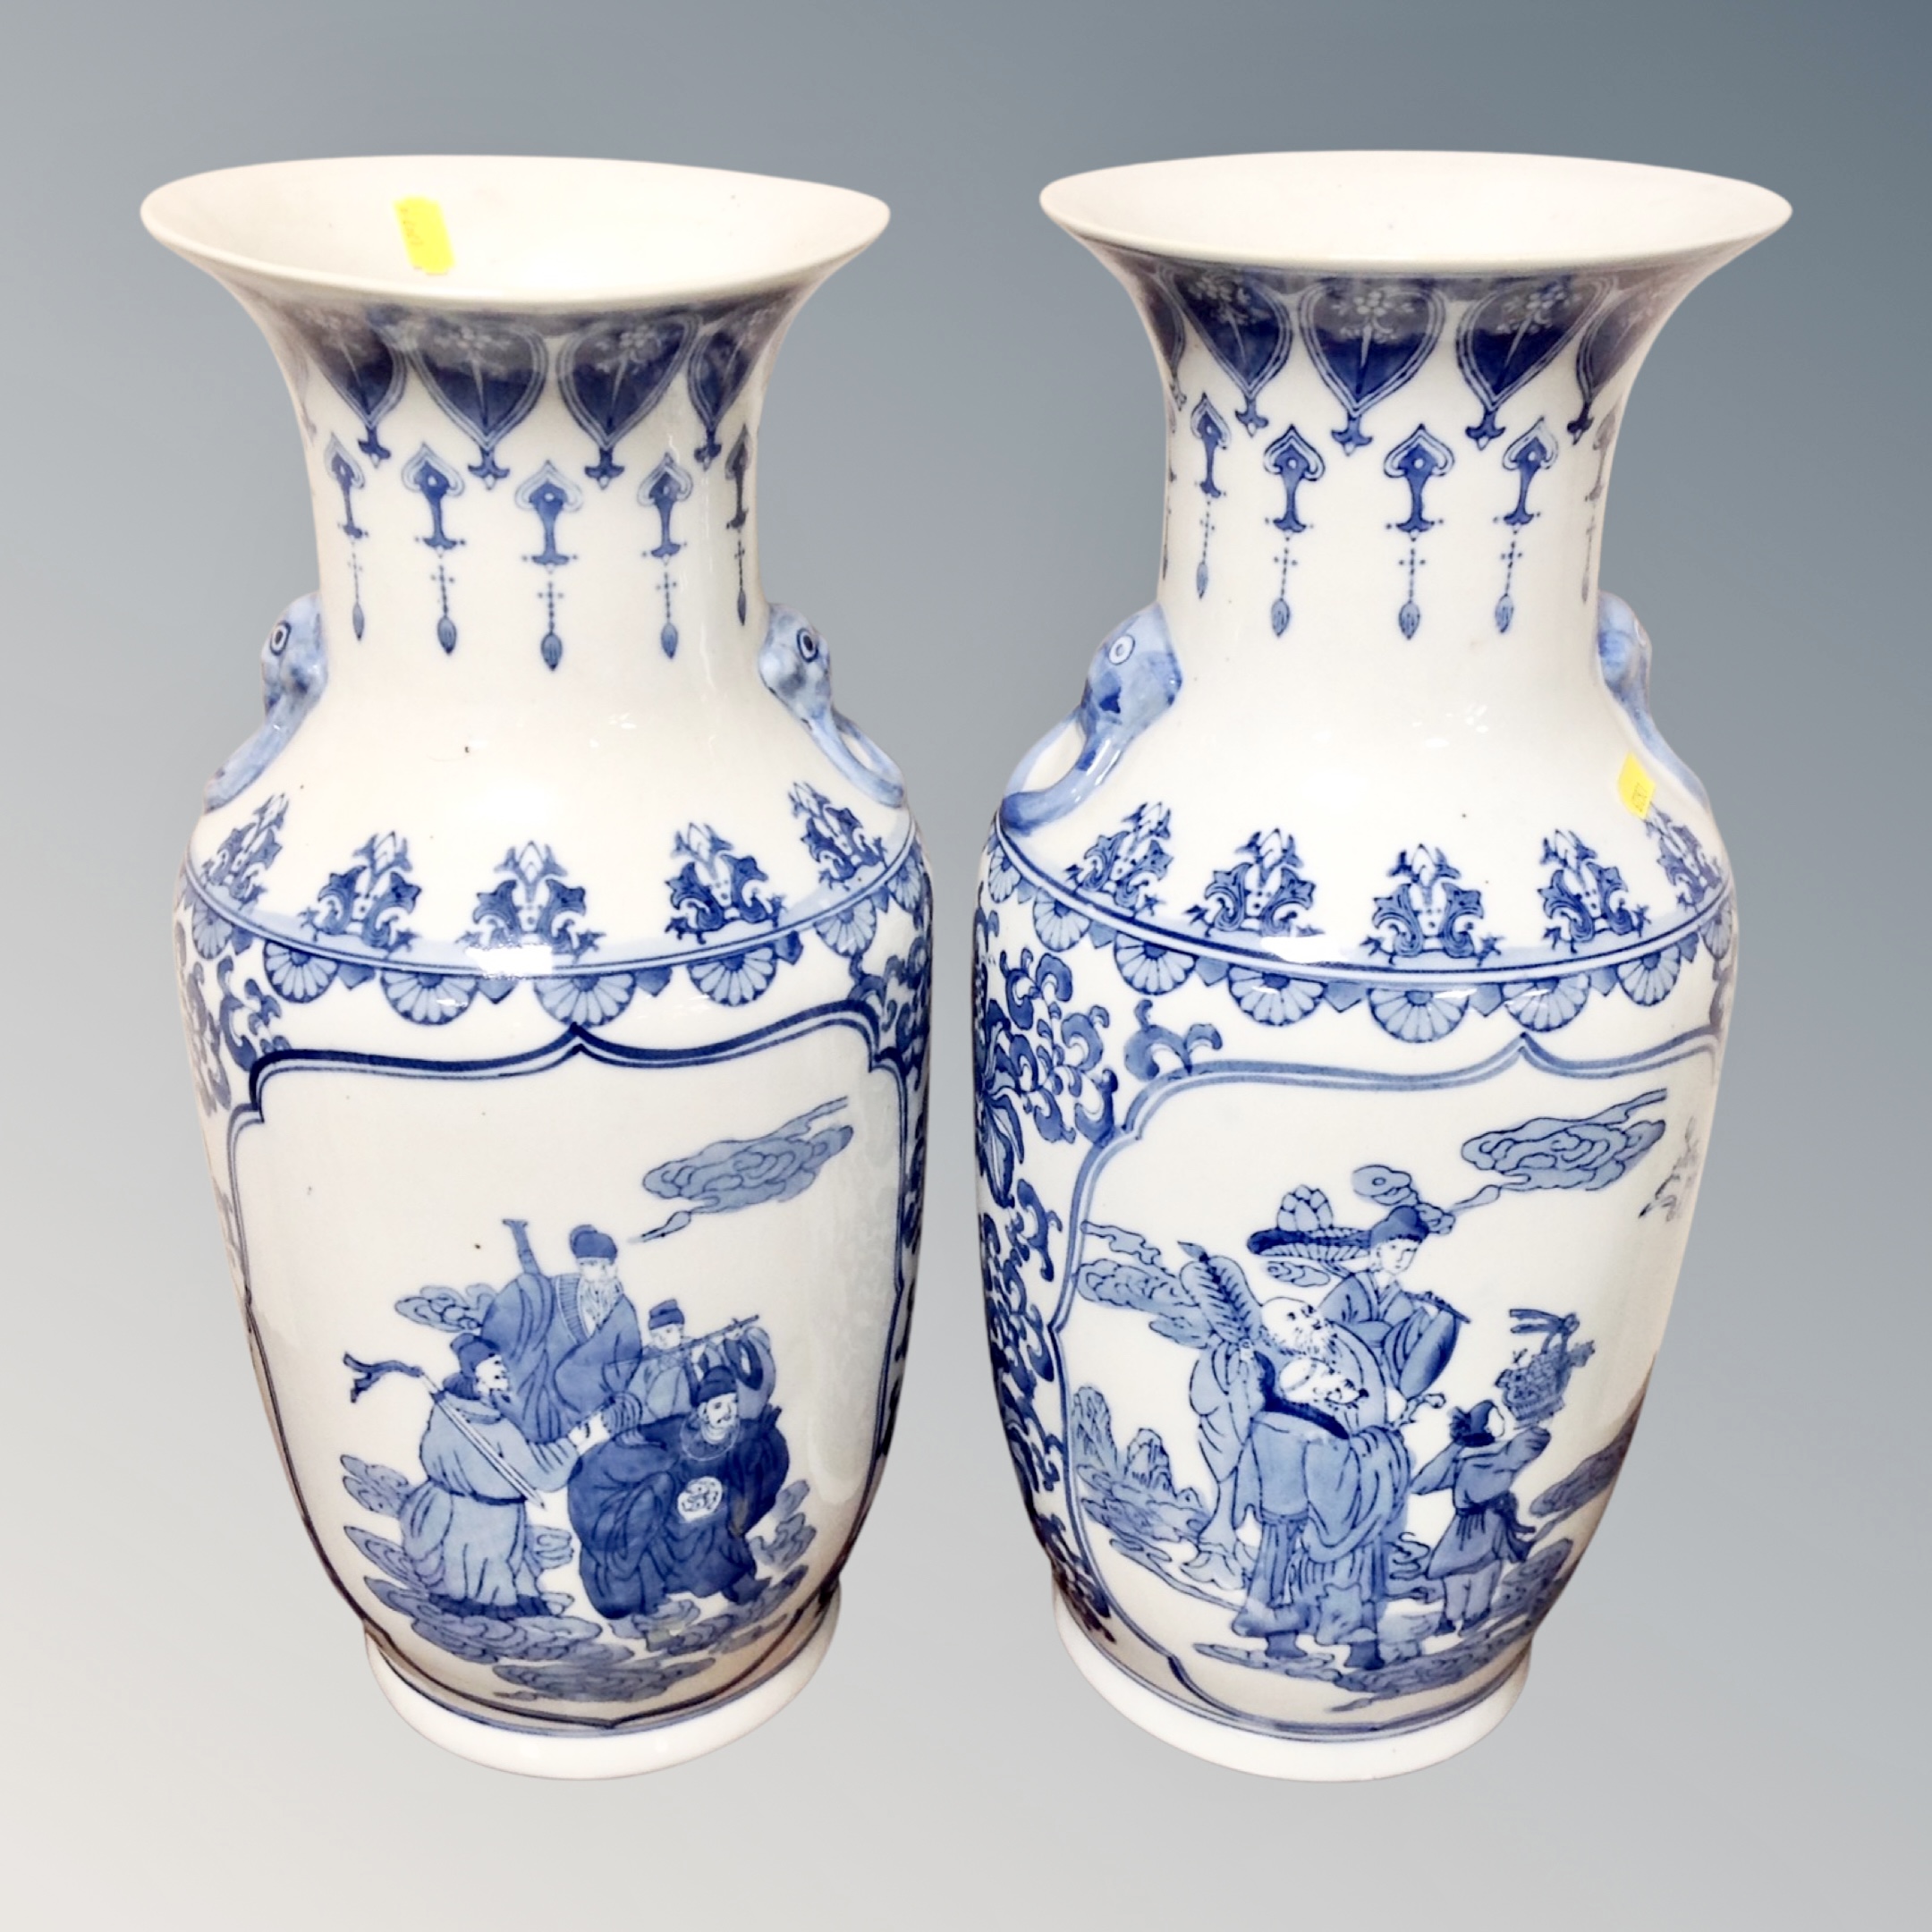 A pair of 20th century Chinese blue and white porcelain vases,